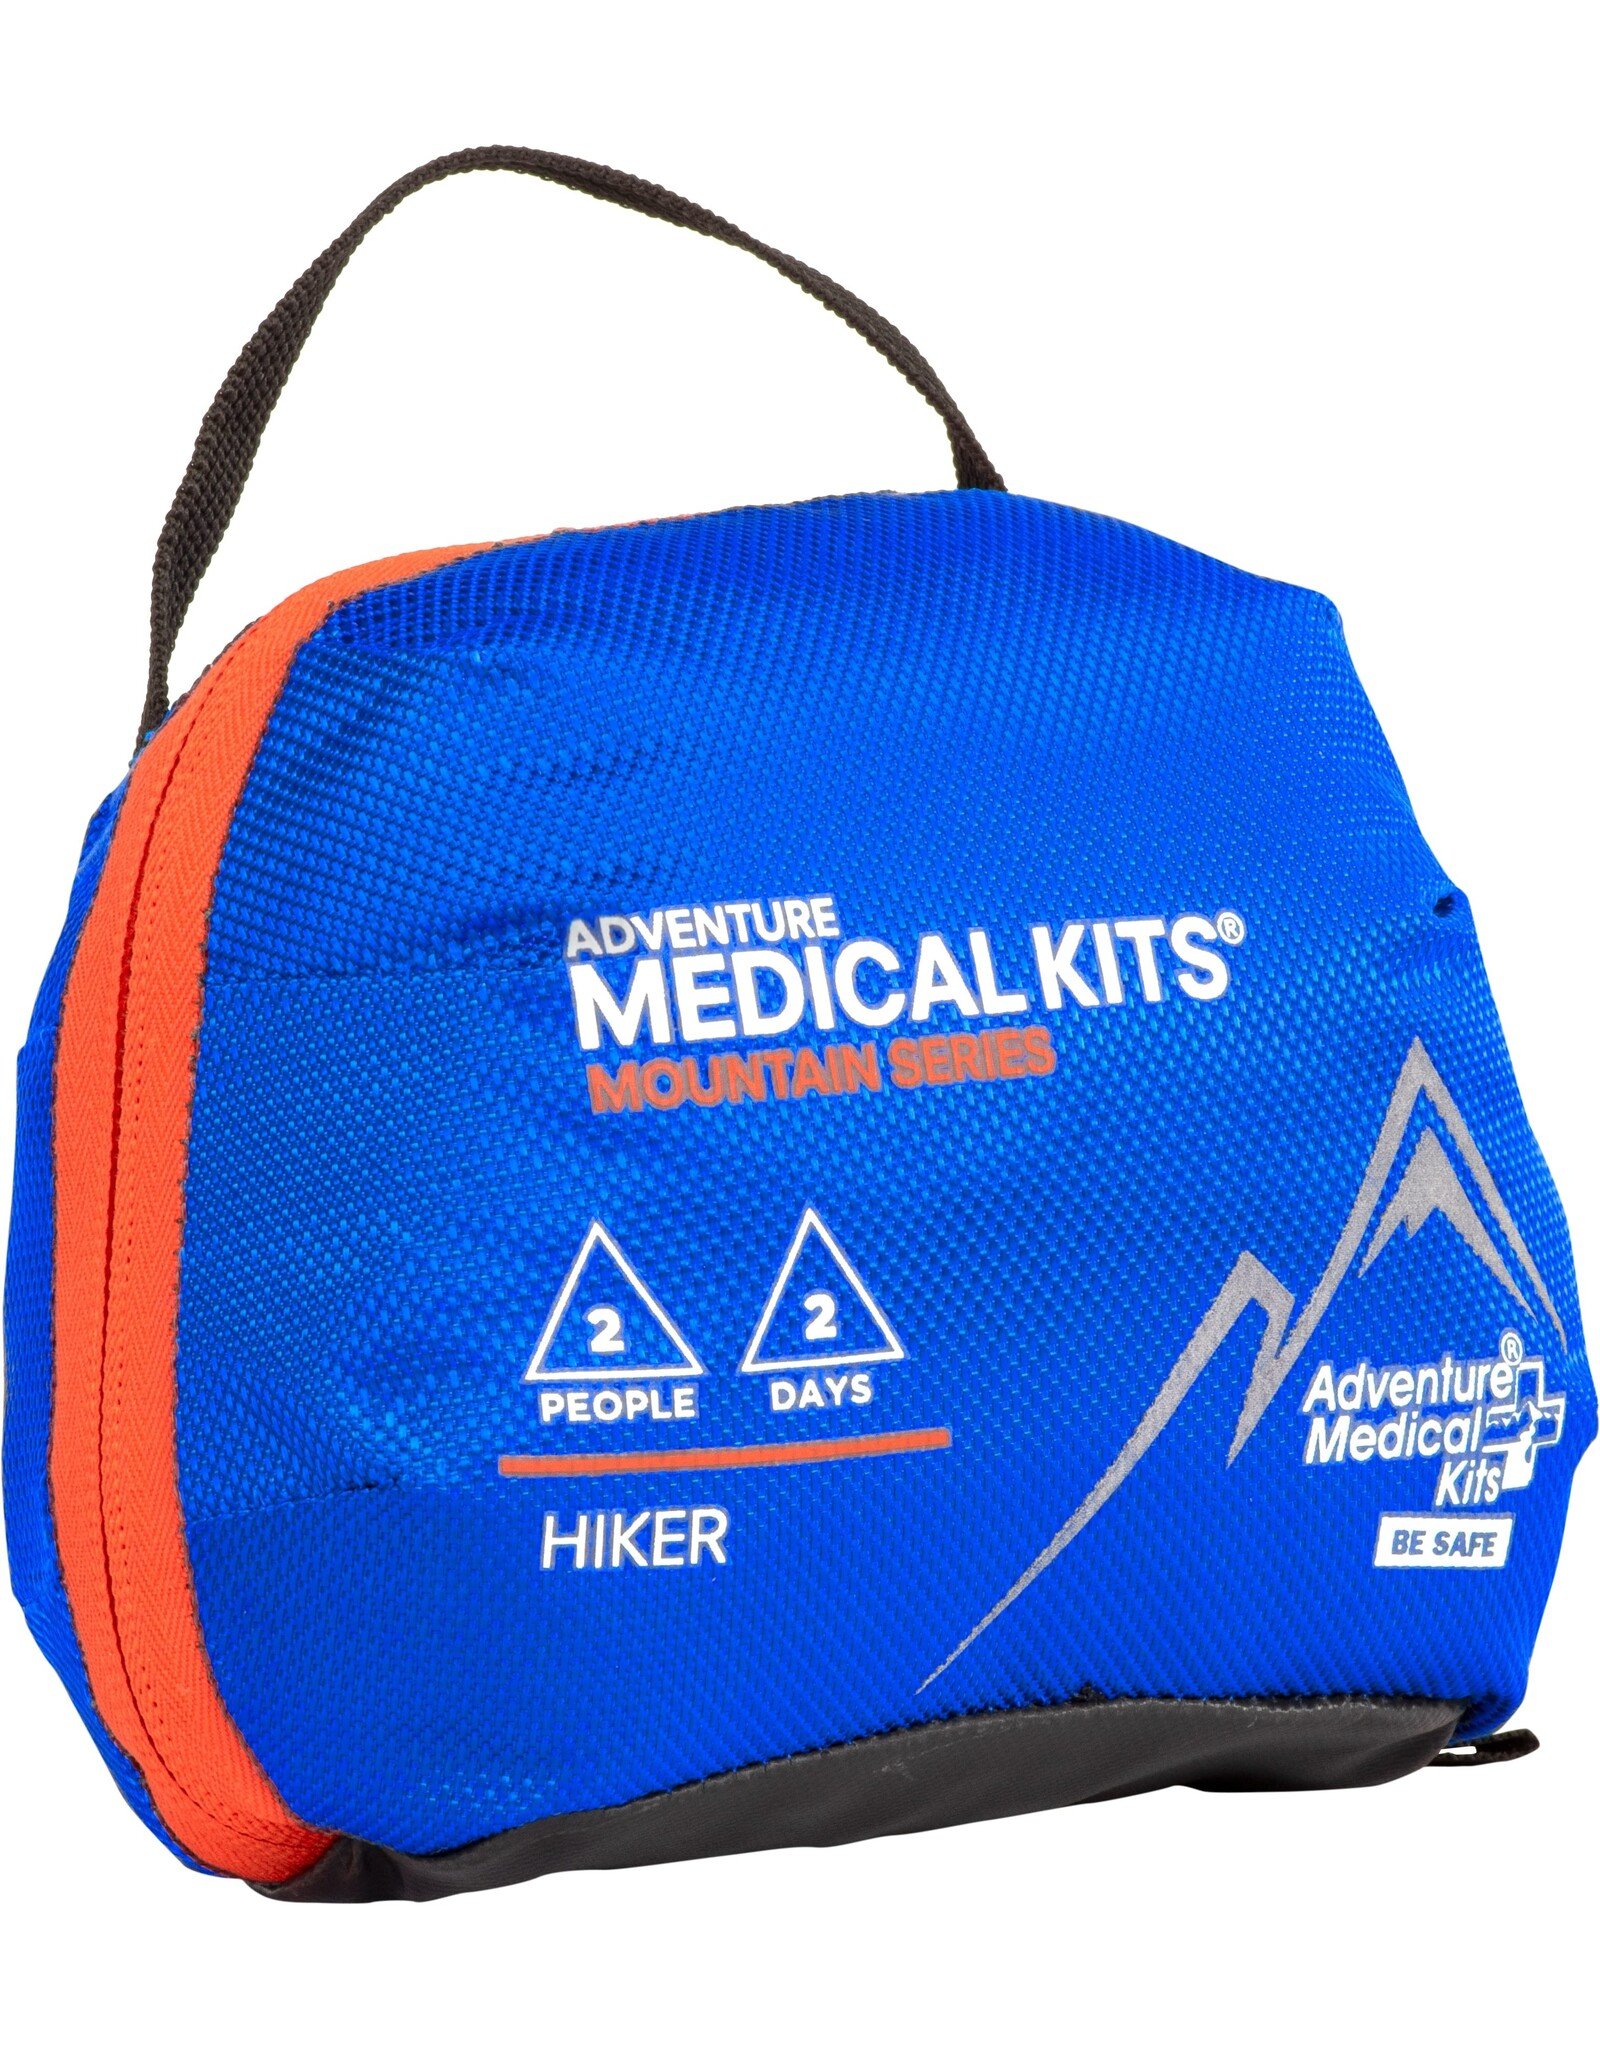 ADVENTURE MEDICAL KITS FIRST AID MOUNTAIN SERIES HIKER